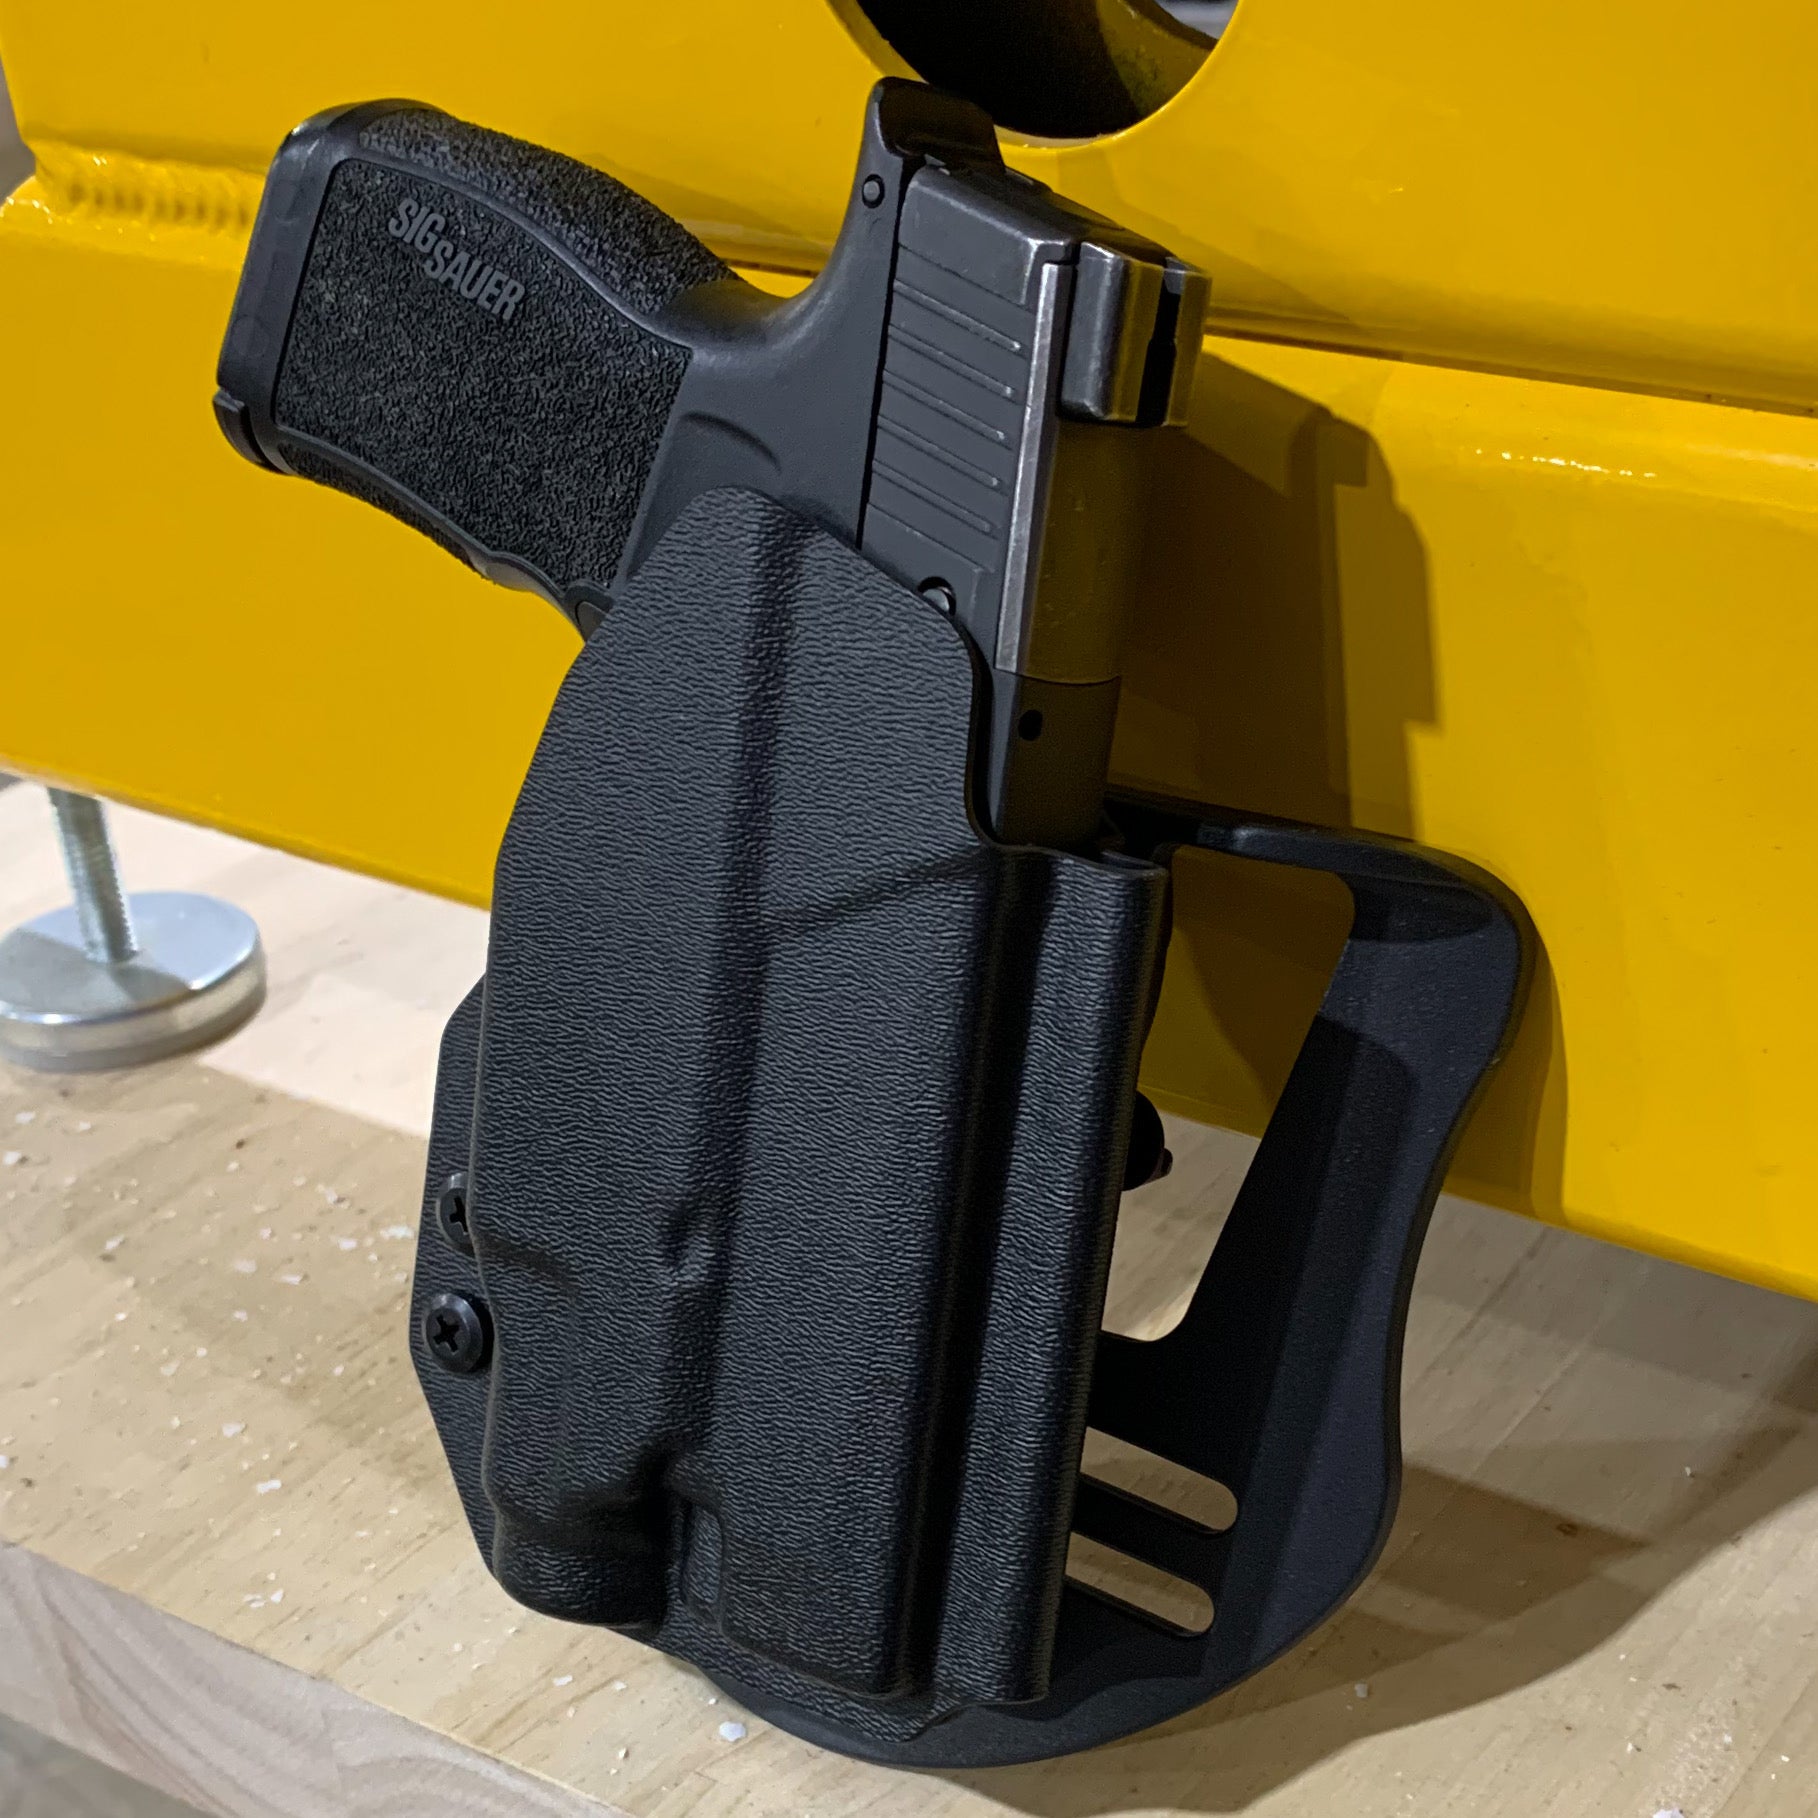 Outside Waistband Holster designed to fit the Sig Sauer P365XL pistol with the Streamlight TLR-7 Sub light mounted to the handgun. Full sweat guard, adjustable retention, minimal material and smooth edges to reduce printing. Made in the USA.